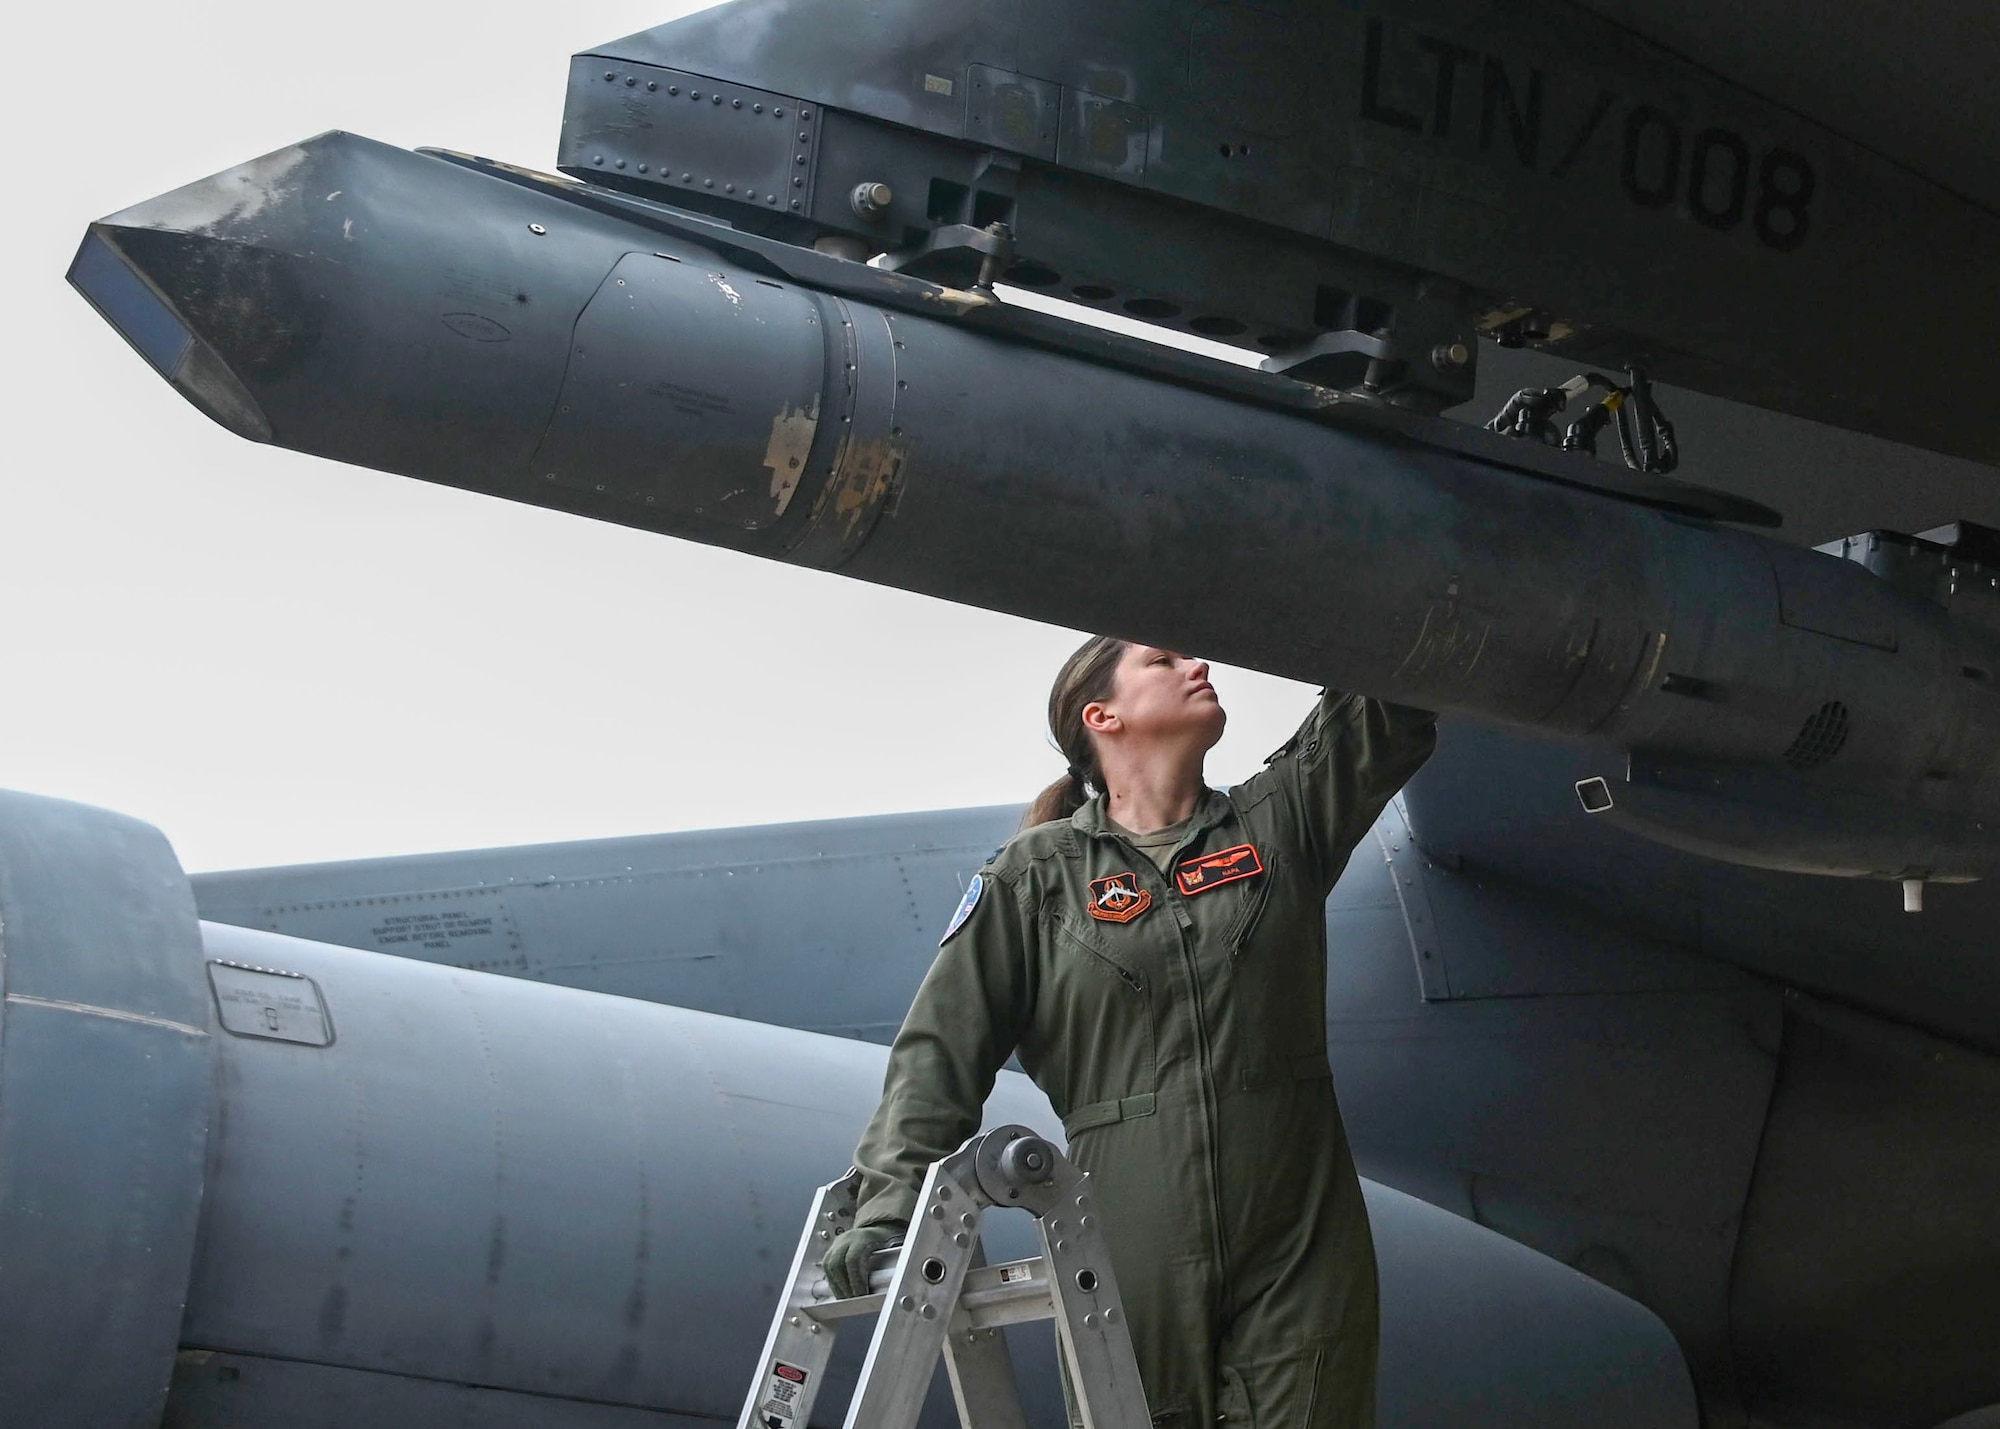 Photo of Airman checking out a B-52